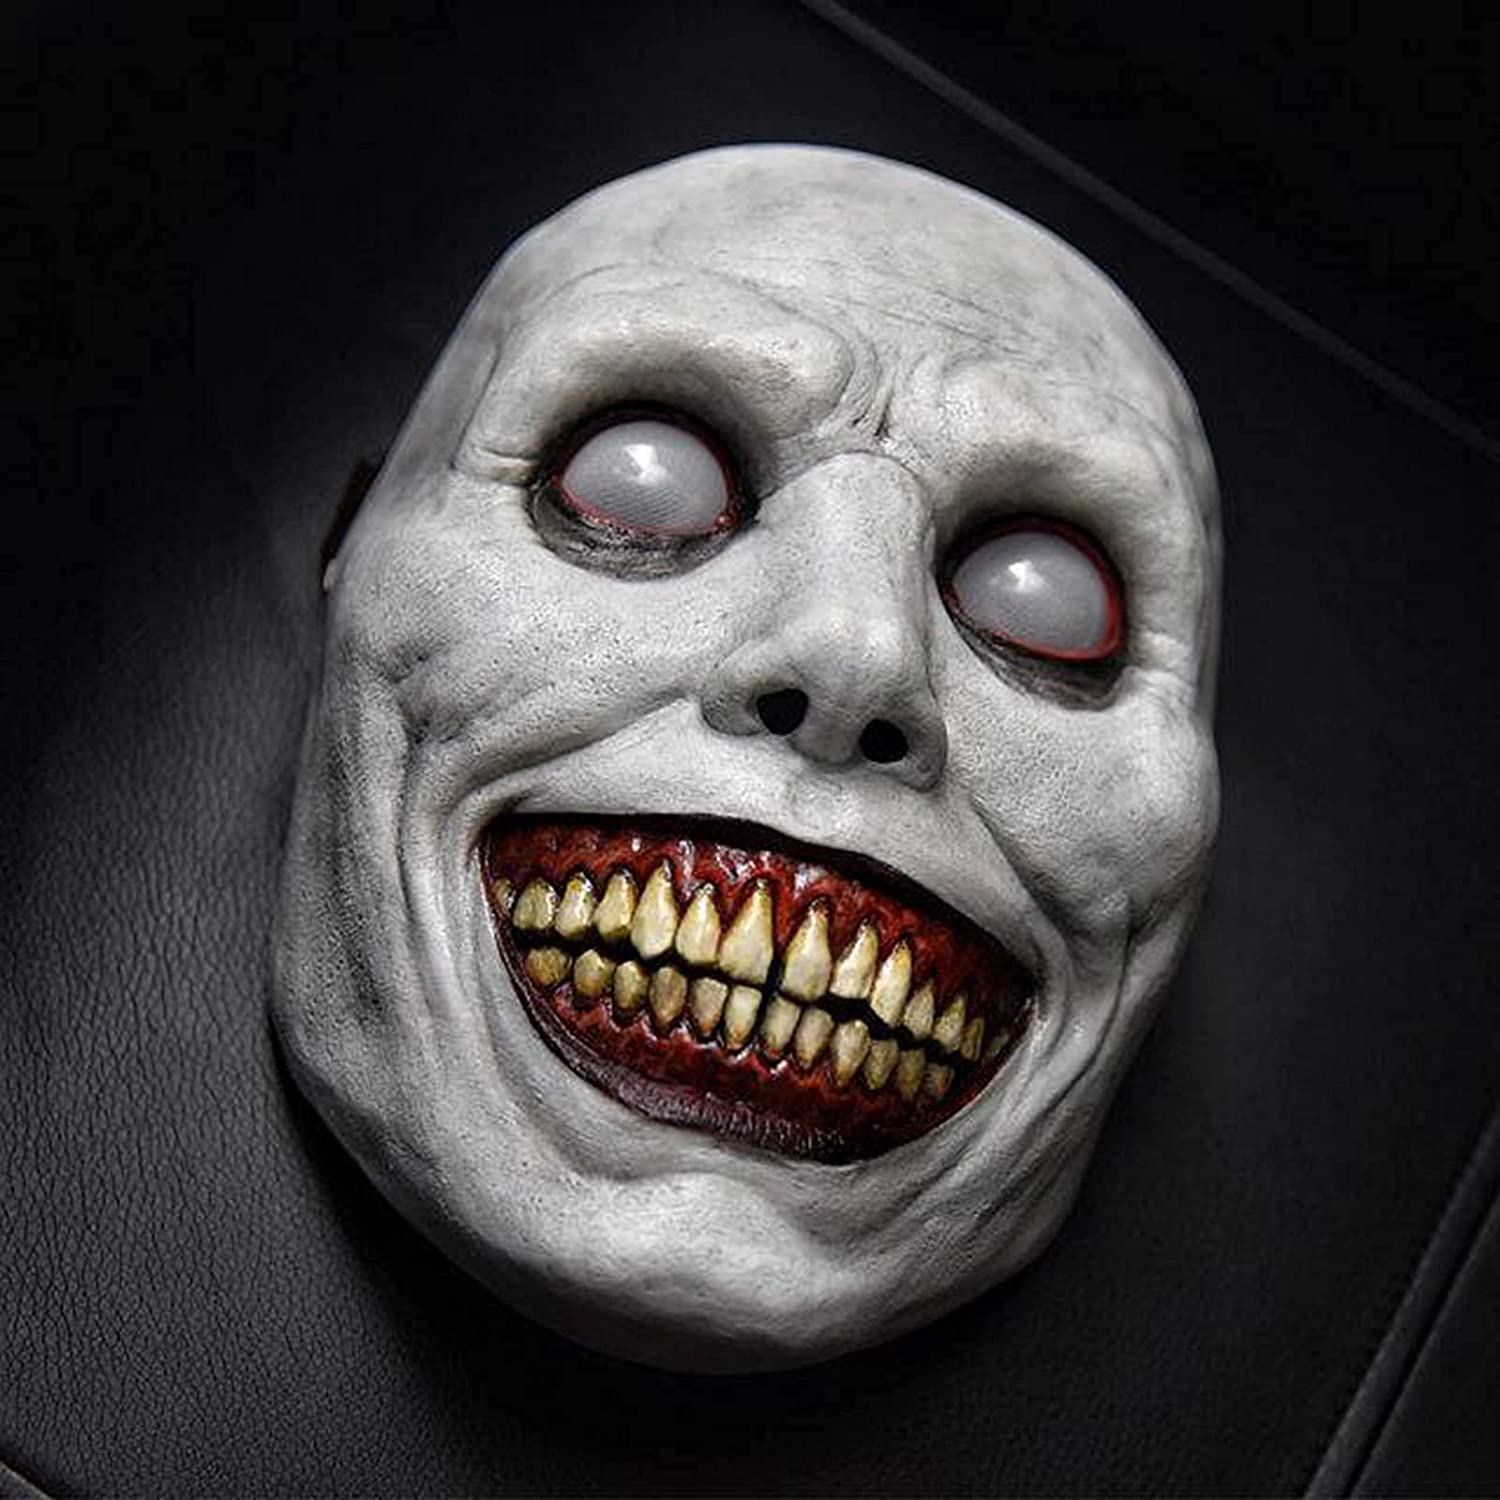 Buy Dubsnevr Smiling Demon mask, Creepy & Scary Halloween mask, Horrible Evil Devil Cosplay Props, Halloween Costume Party props Online in Taiwan. B098QXWN5T